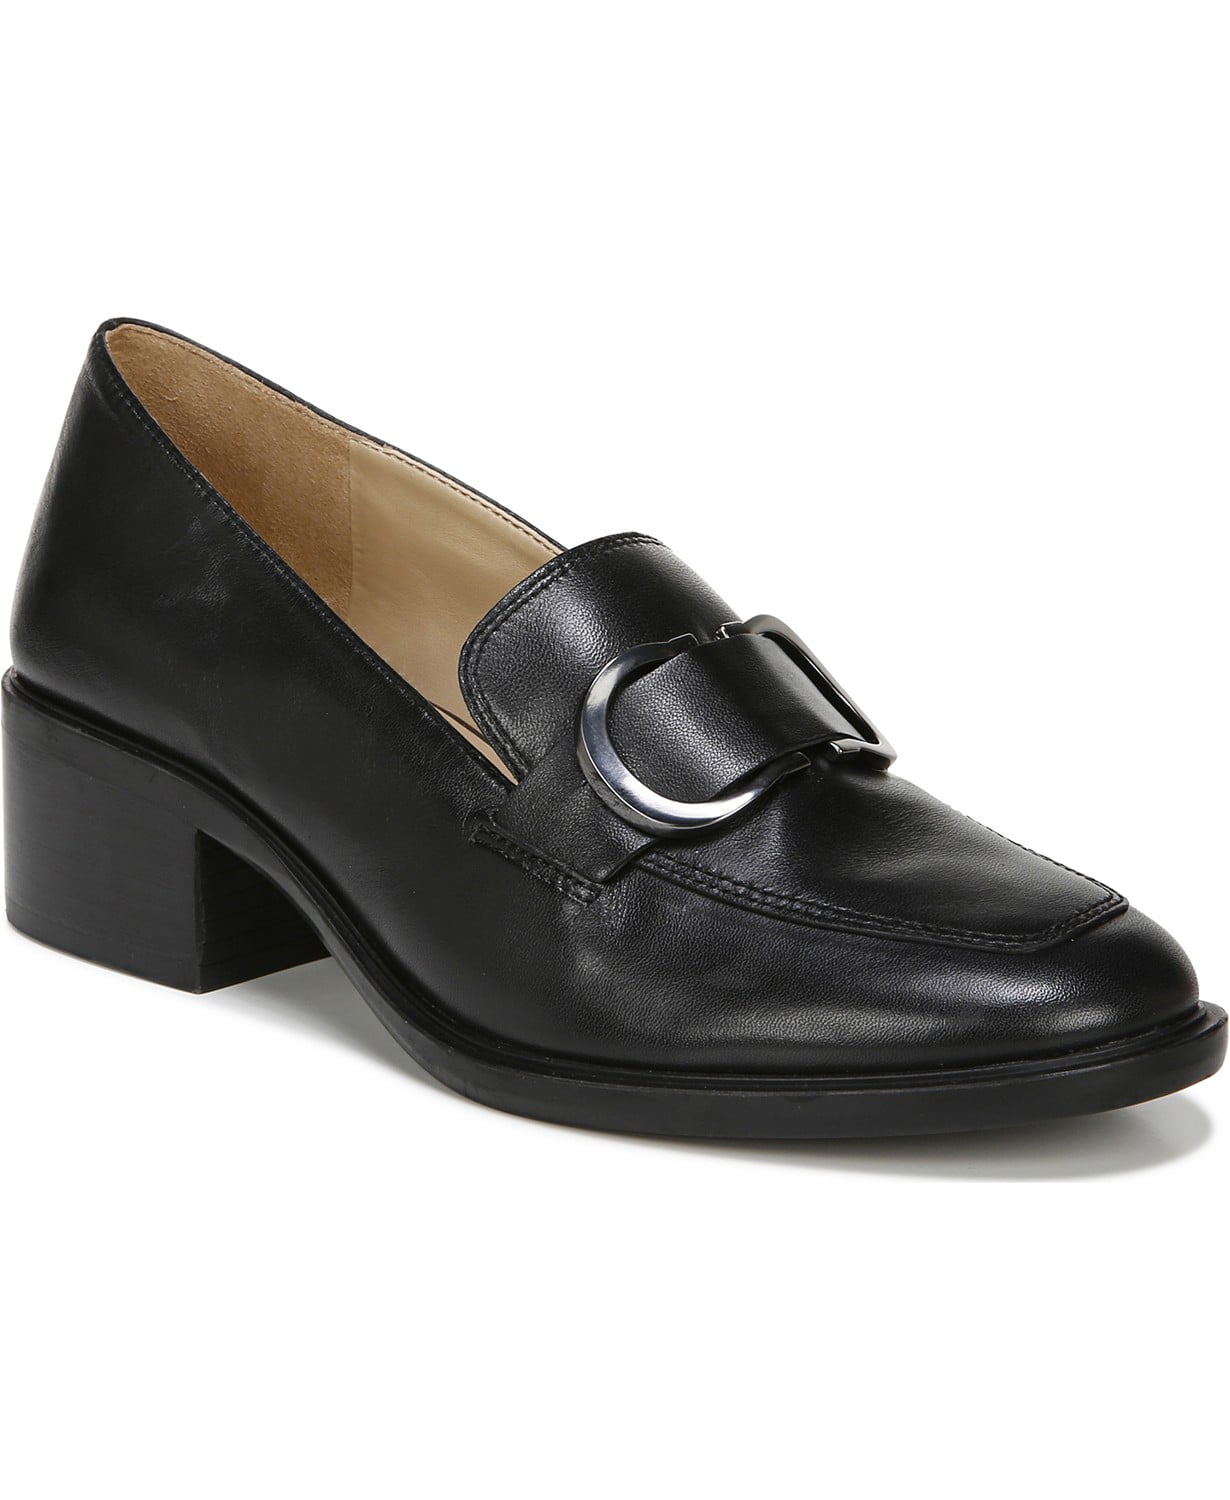 www.couturepoint.com-naturalizer-womens-black-leather-pascal-slip-on-pumps